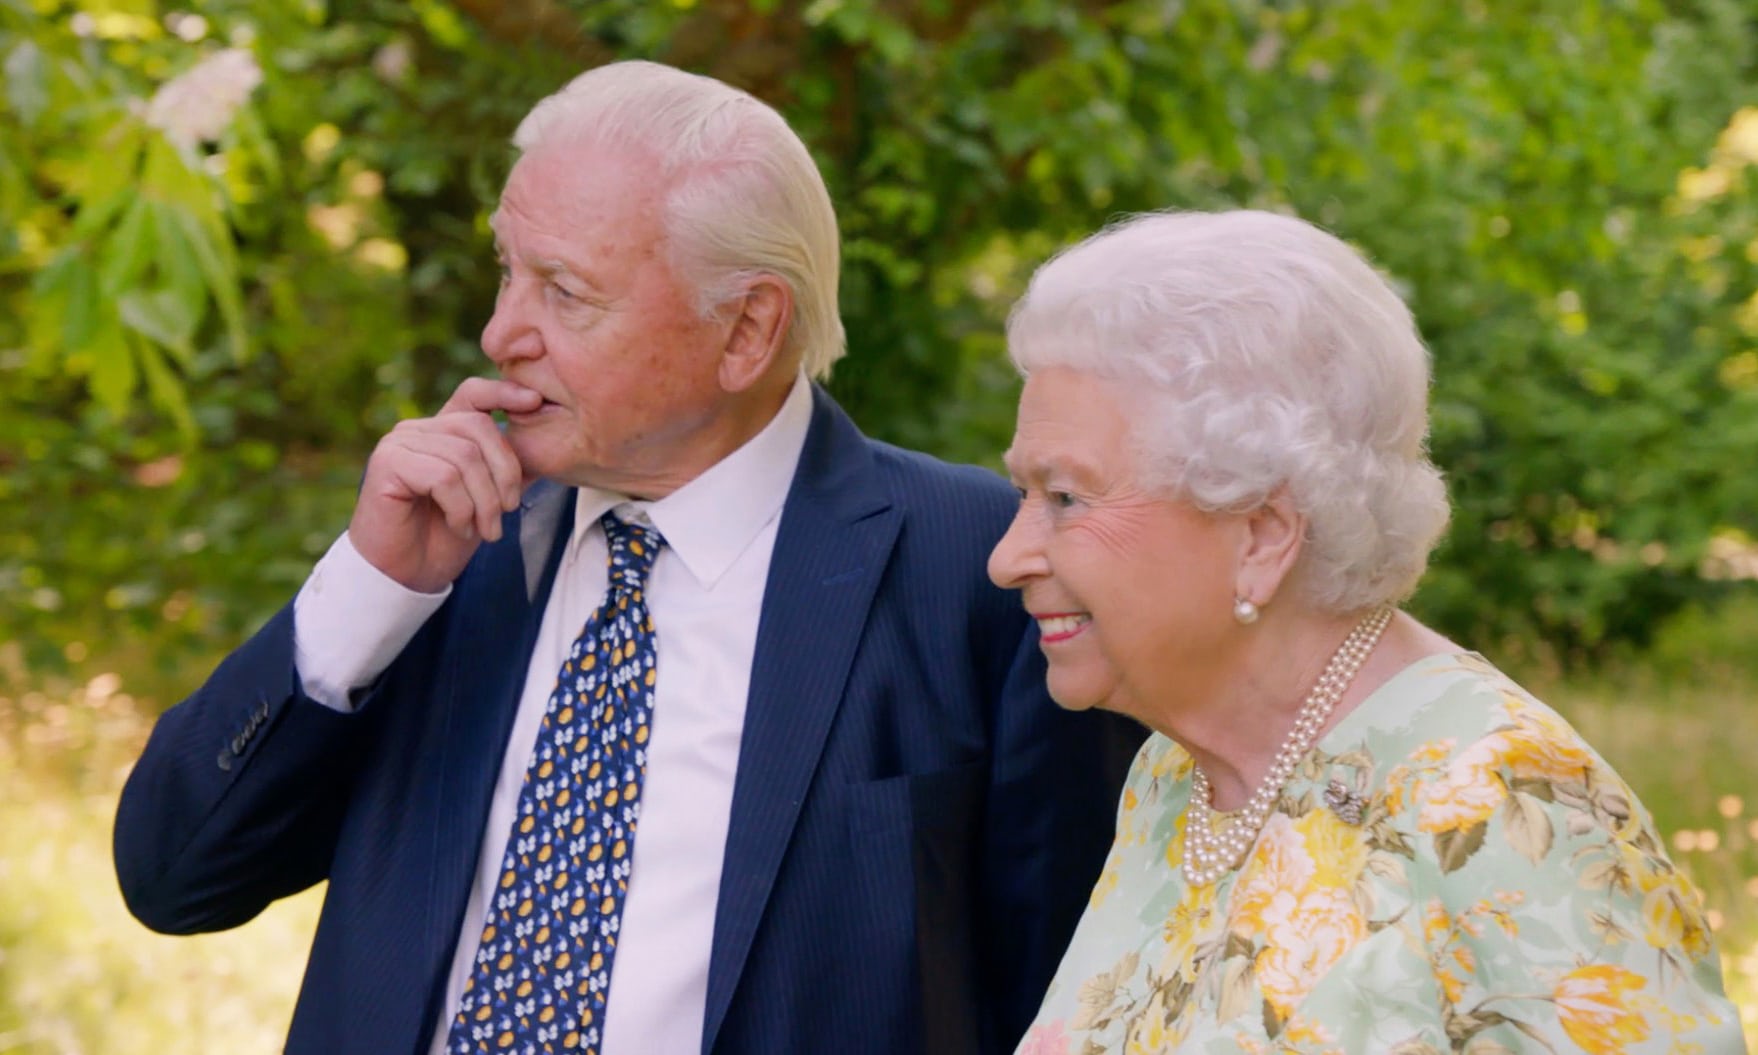 The Queen and Sir David Attenborough